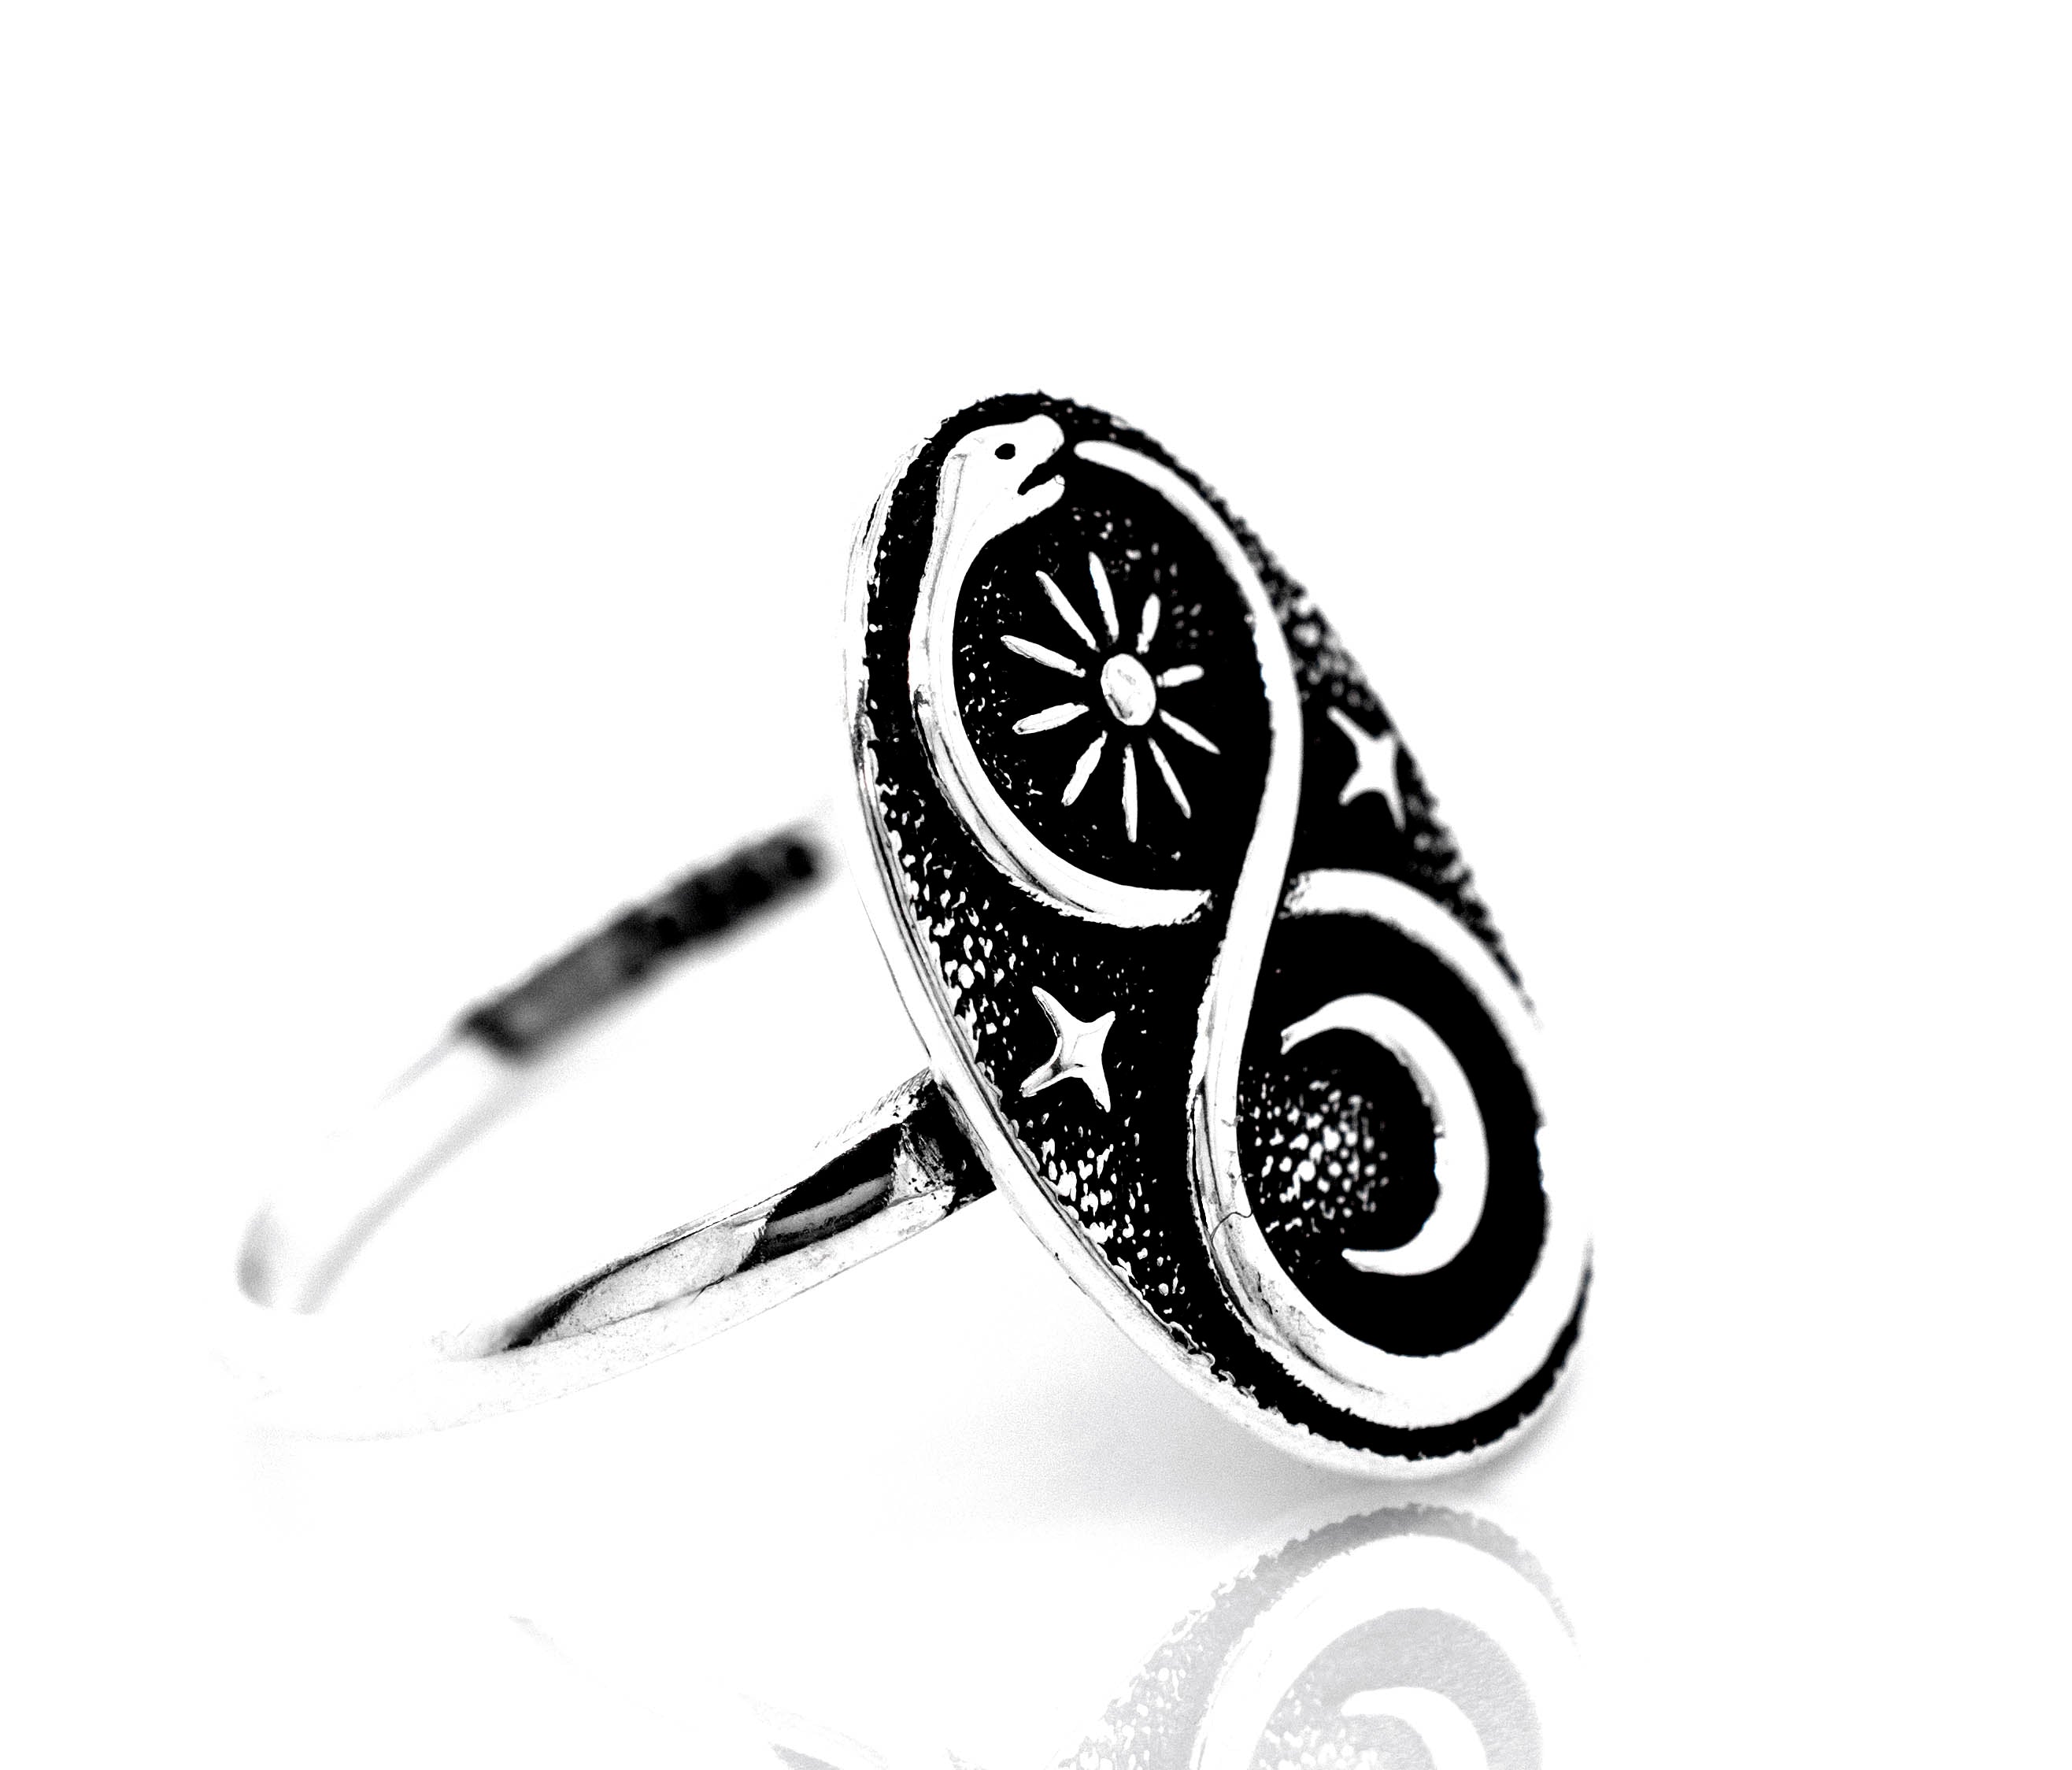 Infinity Dragon Circle Ouroboros 925 Sterling Silver Charm Bead For Pandora  & Similar Charm Bracelets or Necklaces